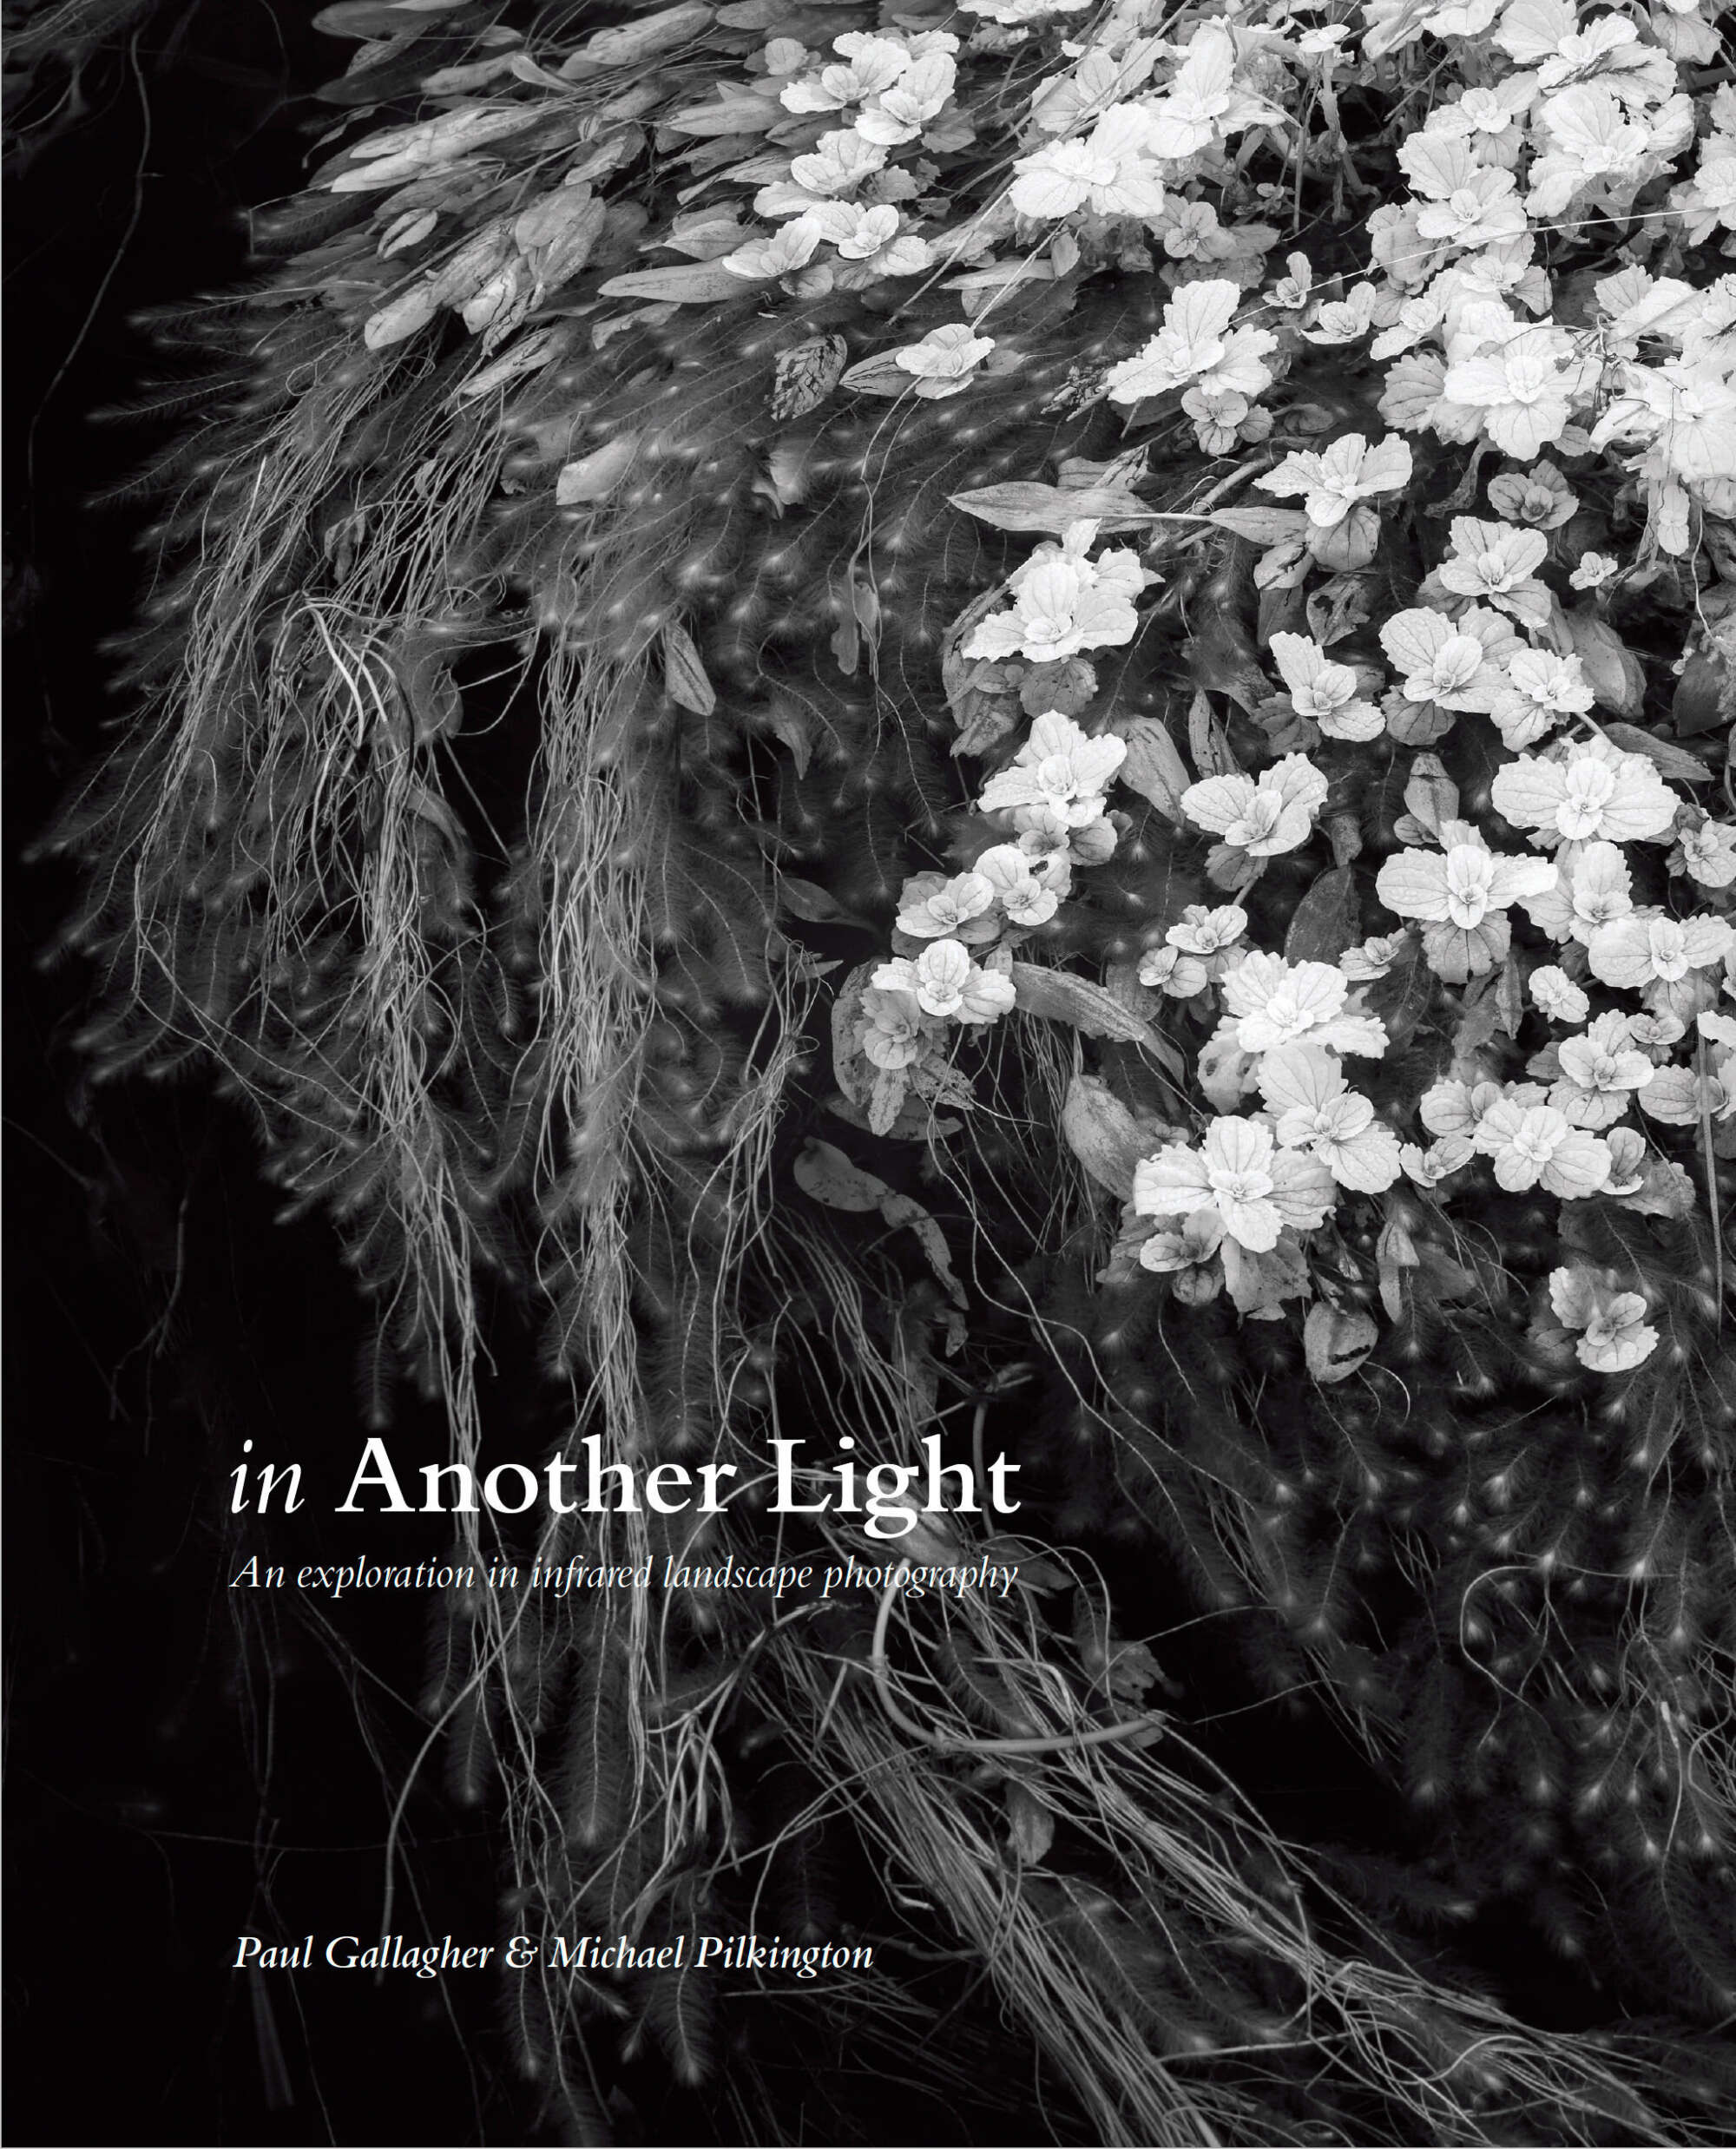 In Light by Paul Gallagher and Michael Pilkington | Aspect2i